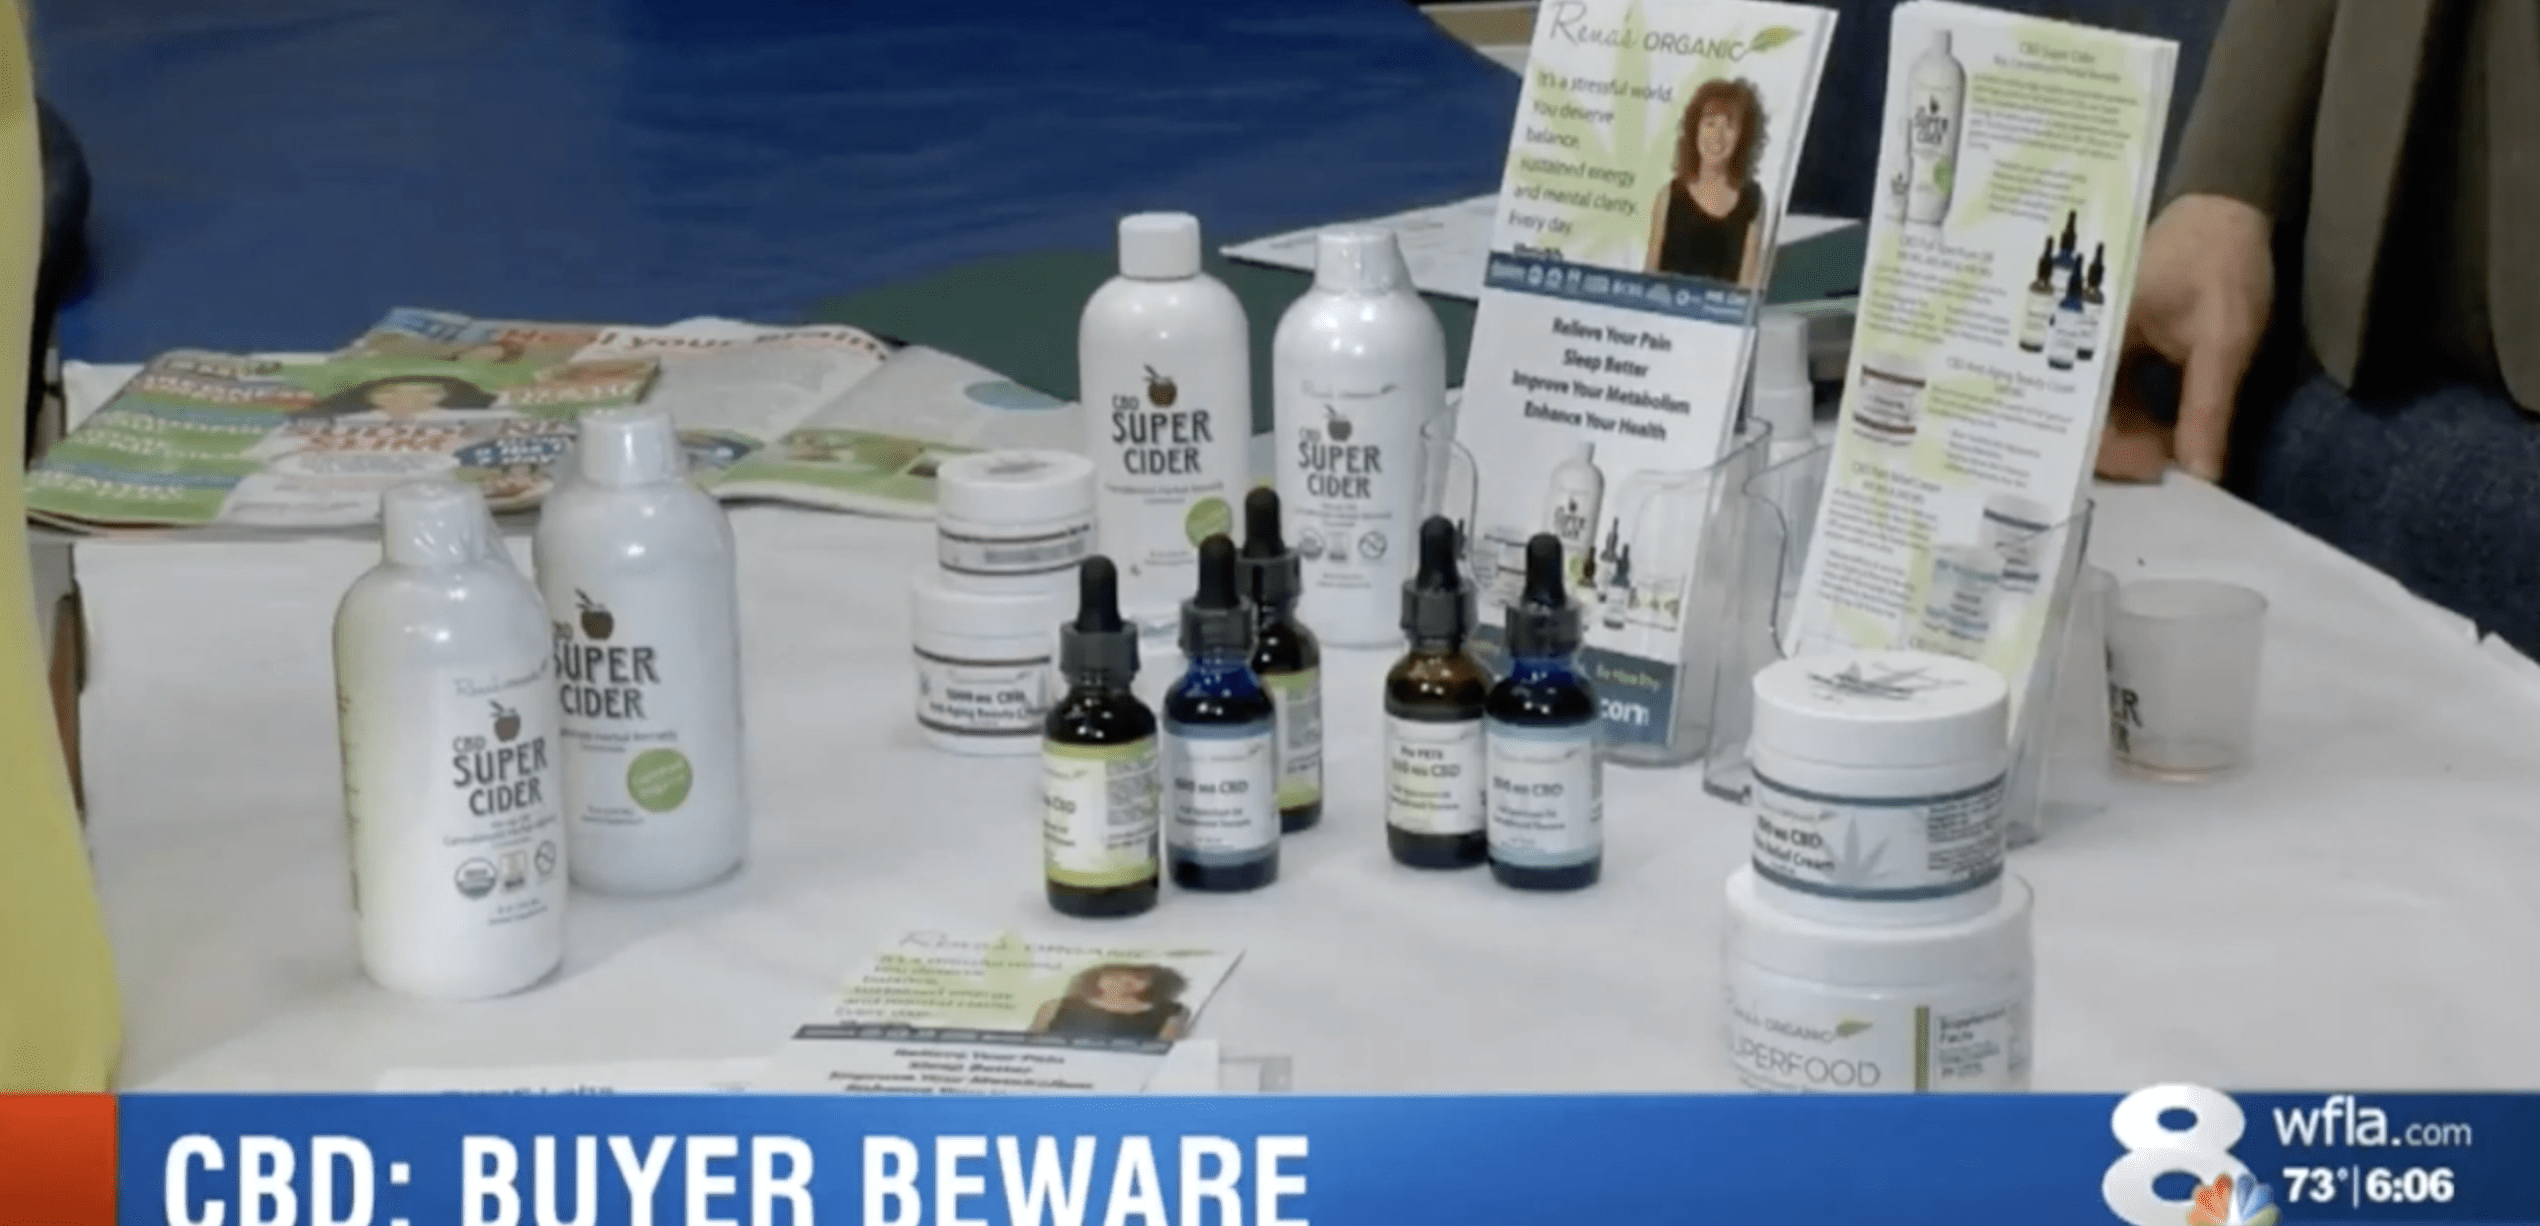 NBC-TV Features Rena’s Organic as a Trusted CBD Brand